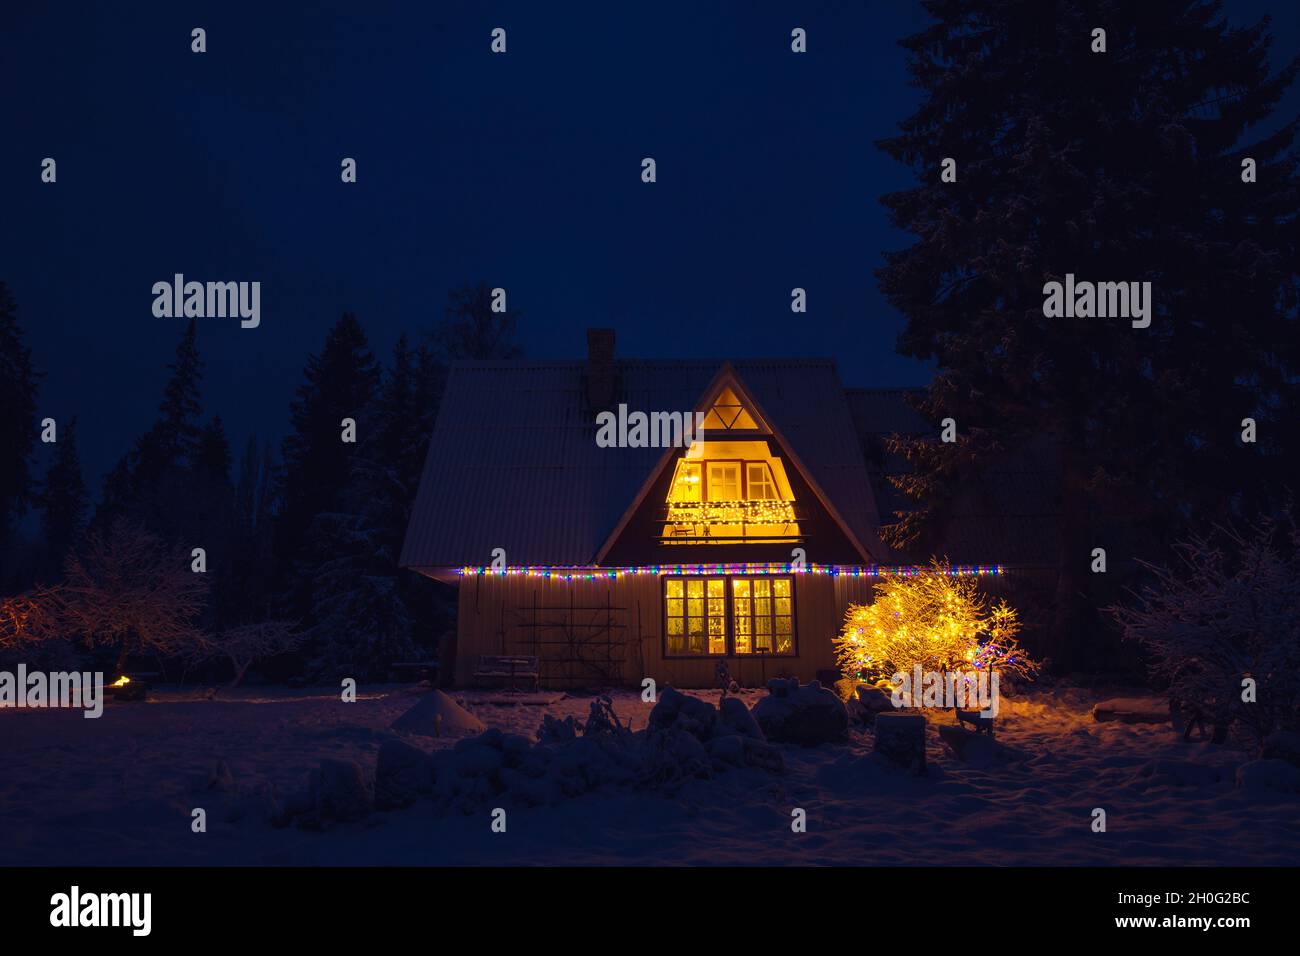 Cute decorated vintage country house home in the middle of forest at night. Tranquil Christmas Eve with snow in garden and light coming from window. Stock Photo